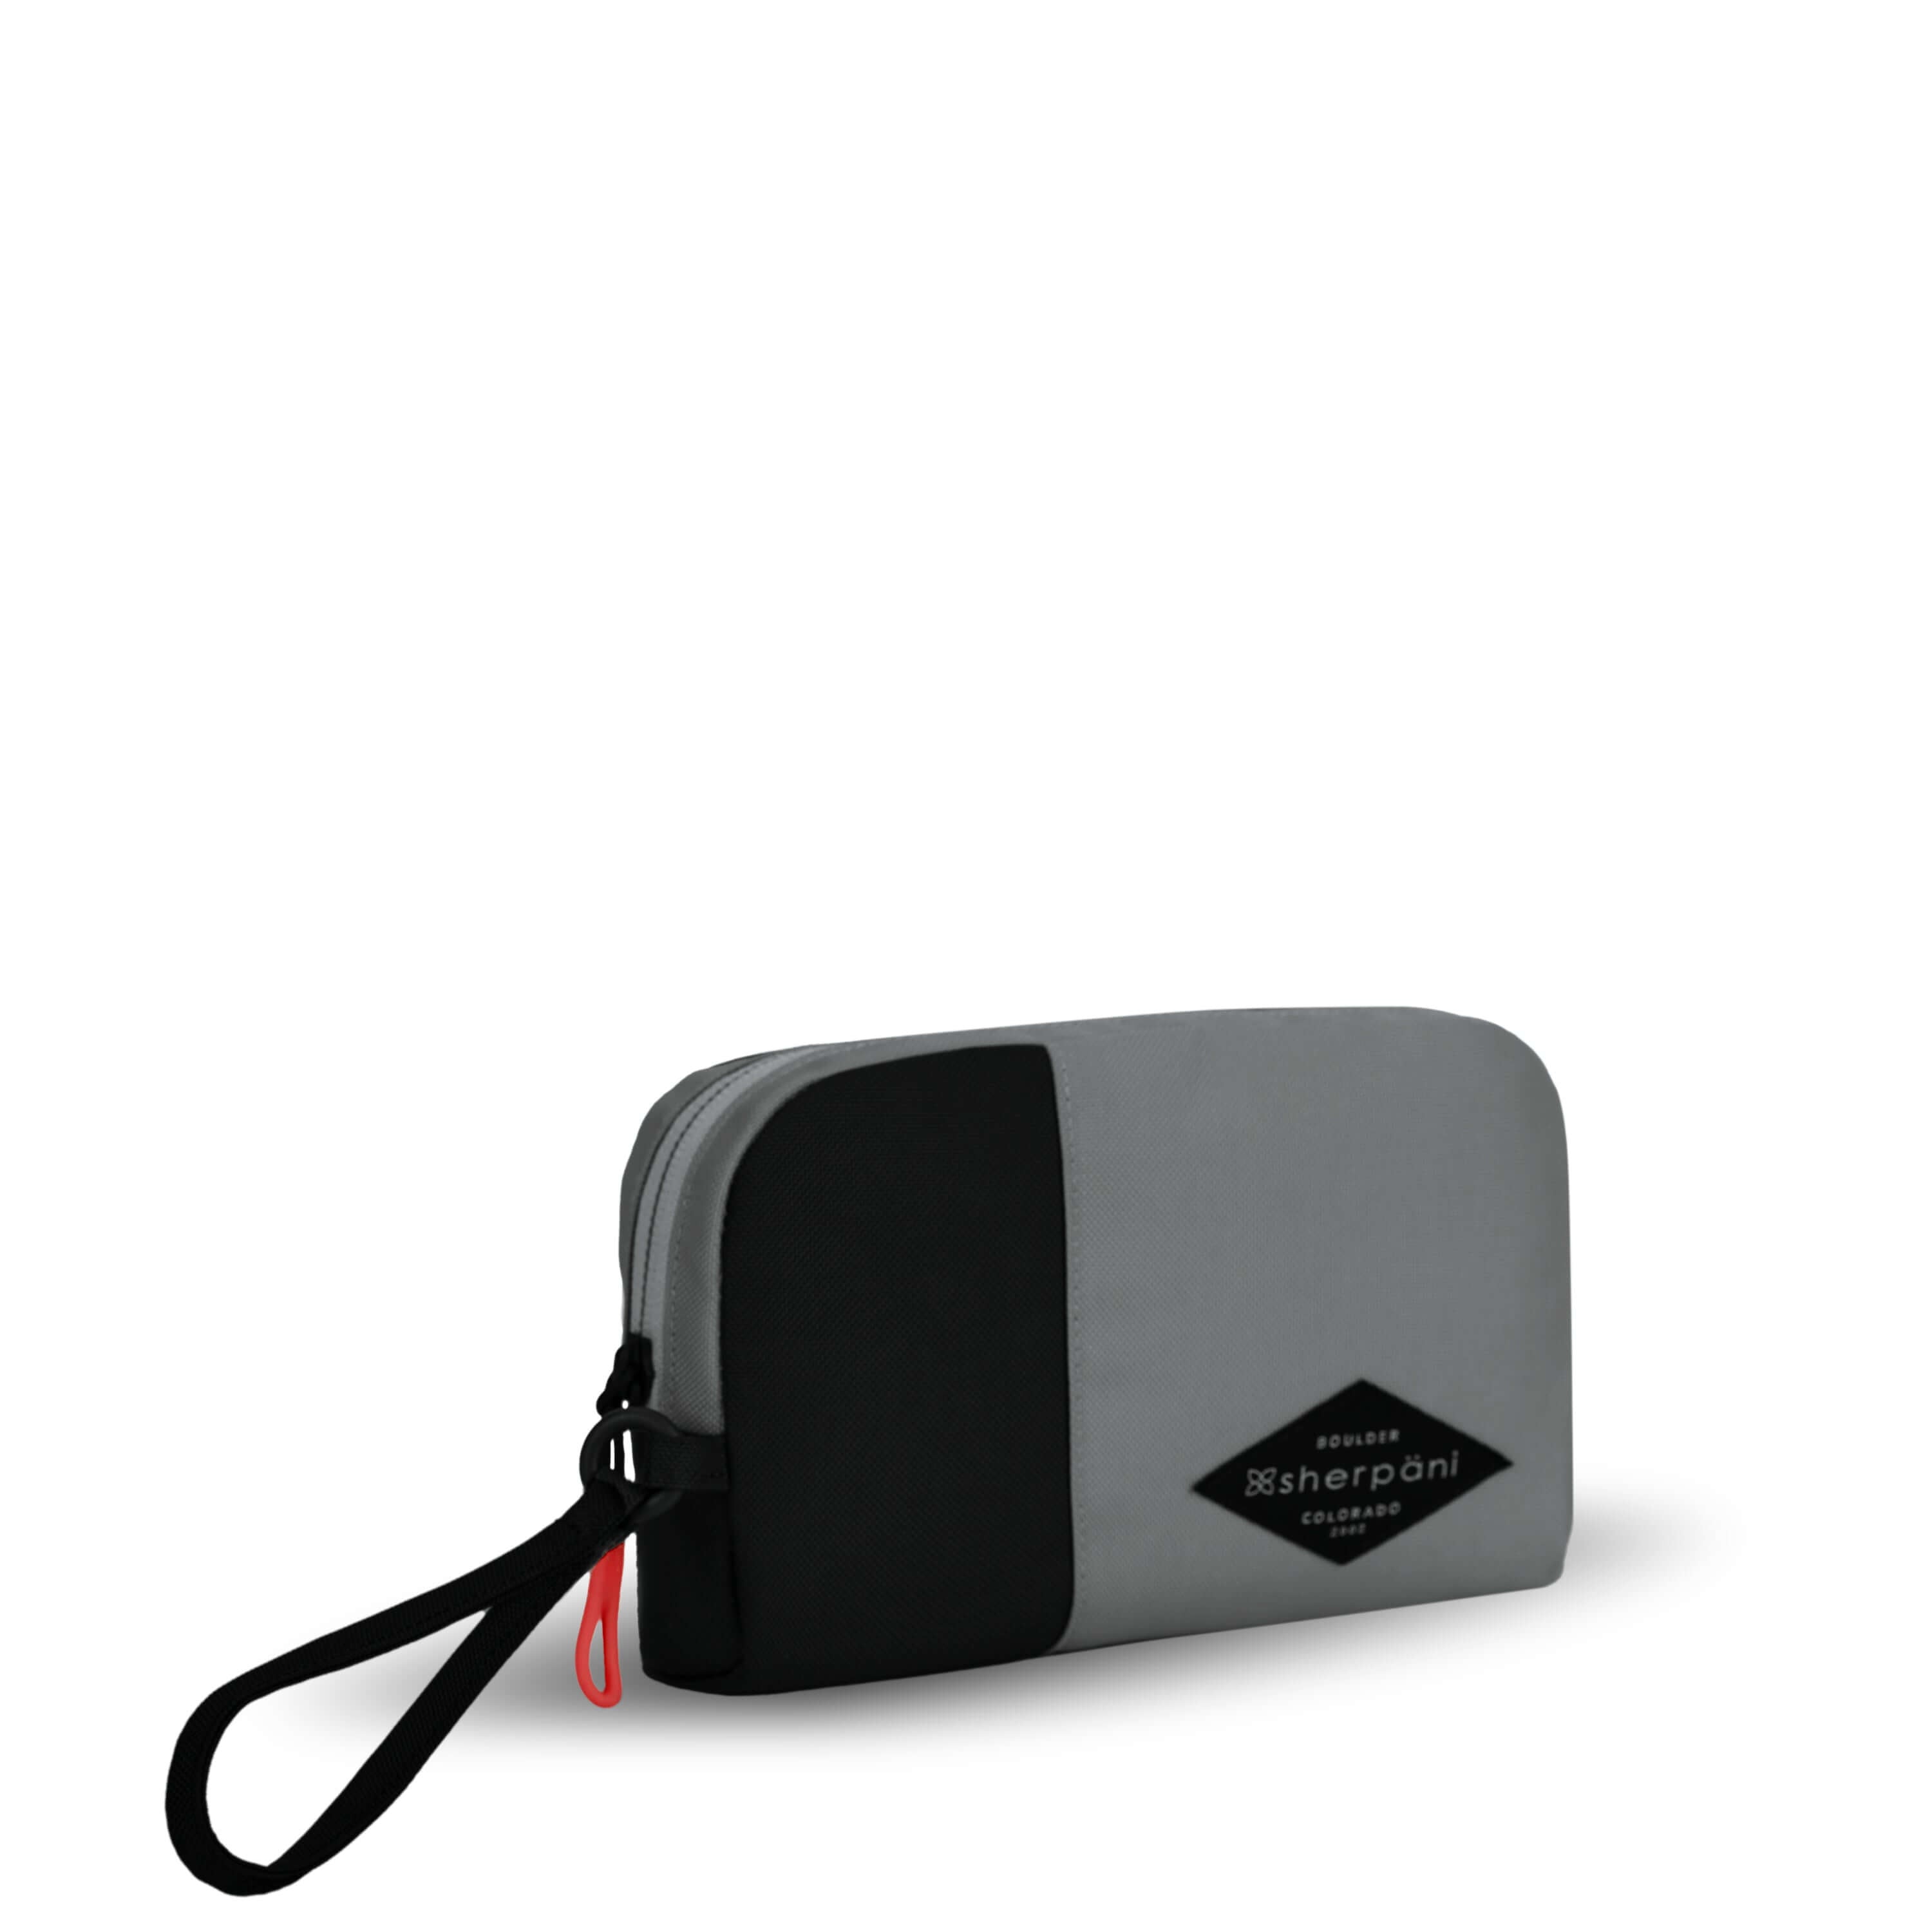 Angled front view of Sherpani travel accessory, the Jolie in Stone, in medium size. The pouch is two-toned in gray and black. It features a black wristlet strap and an easy-pull zipper accented in red.